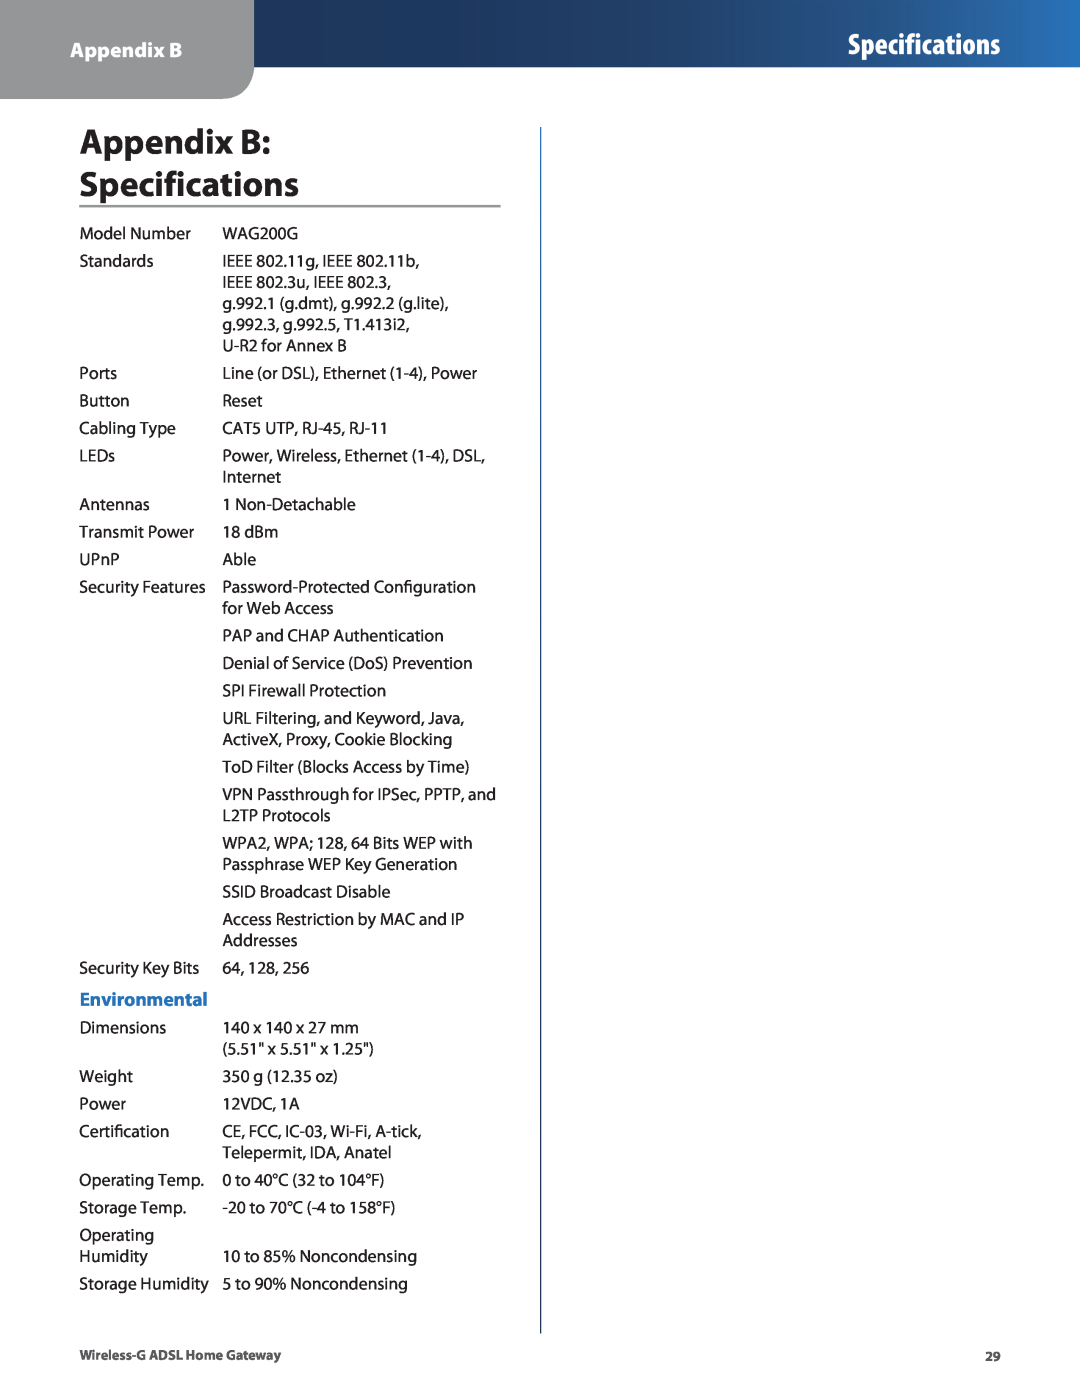 Linksys WAG200G manual Appendix B Specifications, Environmental 